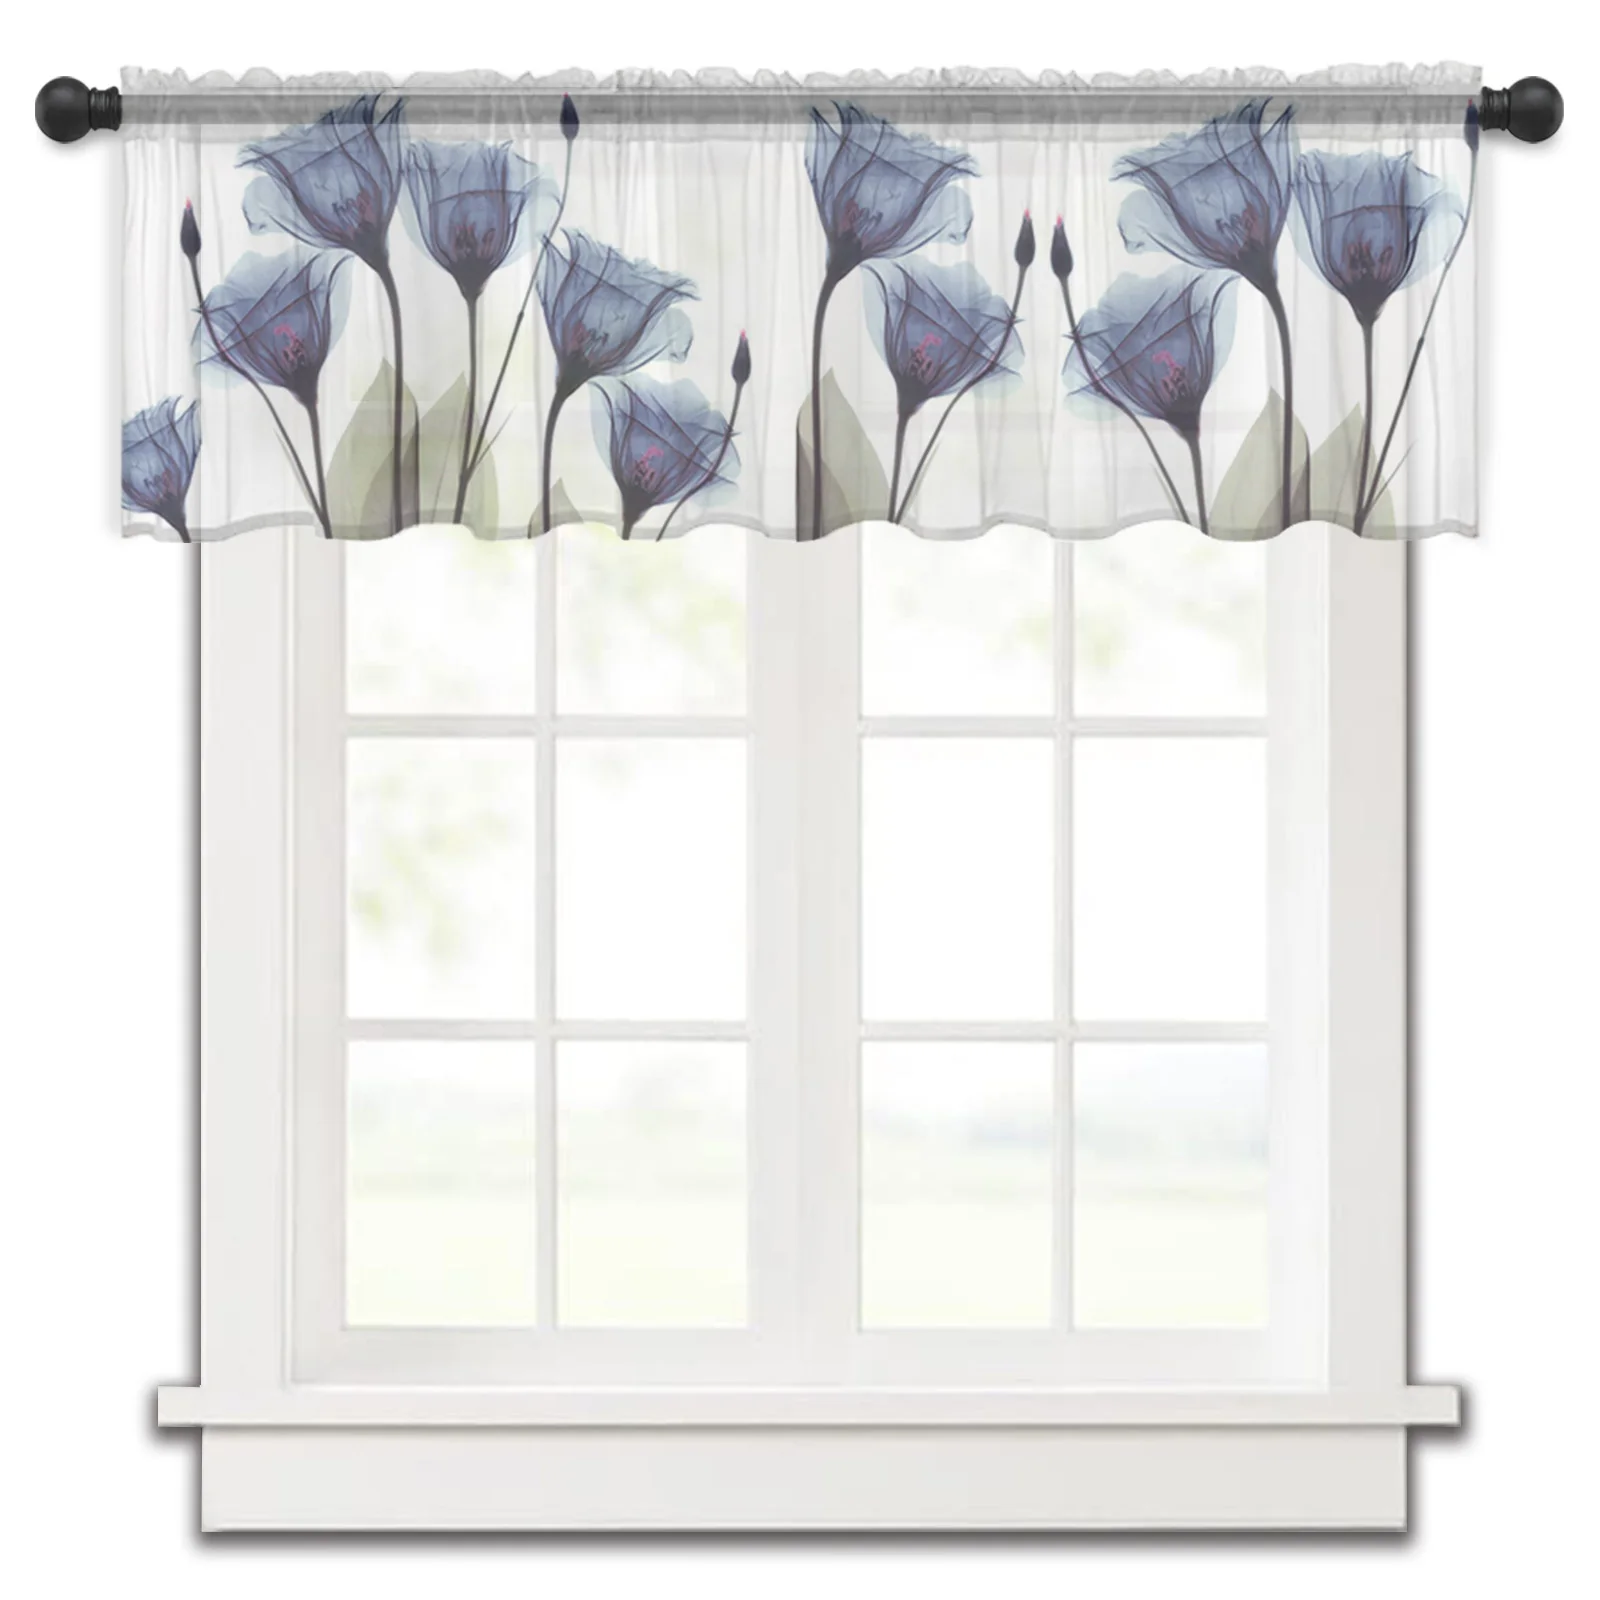 

Flower Summer Idyllic Blue Tulip Kitchen Small Curtain Tulle Sheer Short Curtain Bedroom Living Room Home Decor Voile Drapes